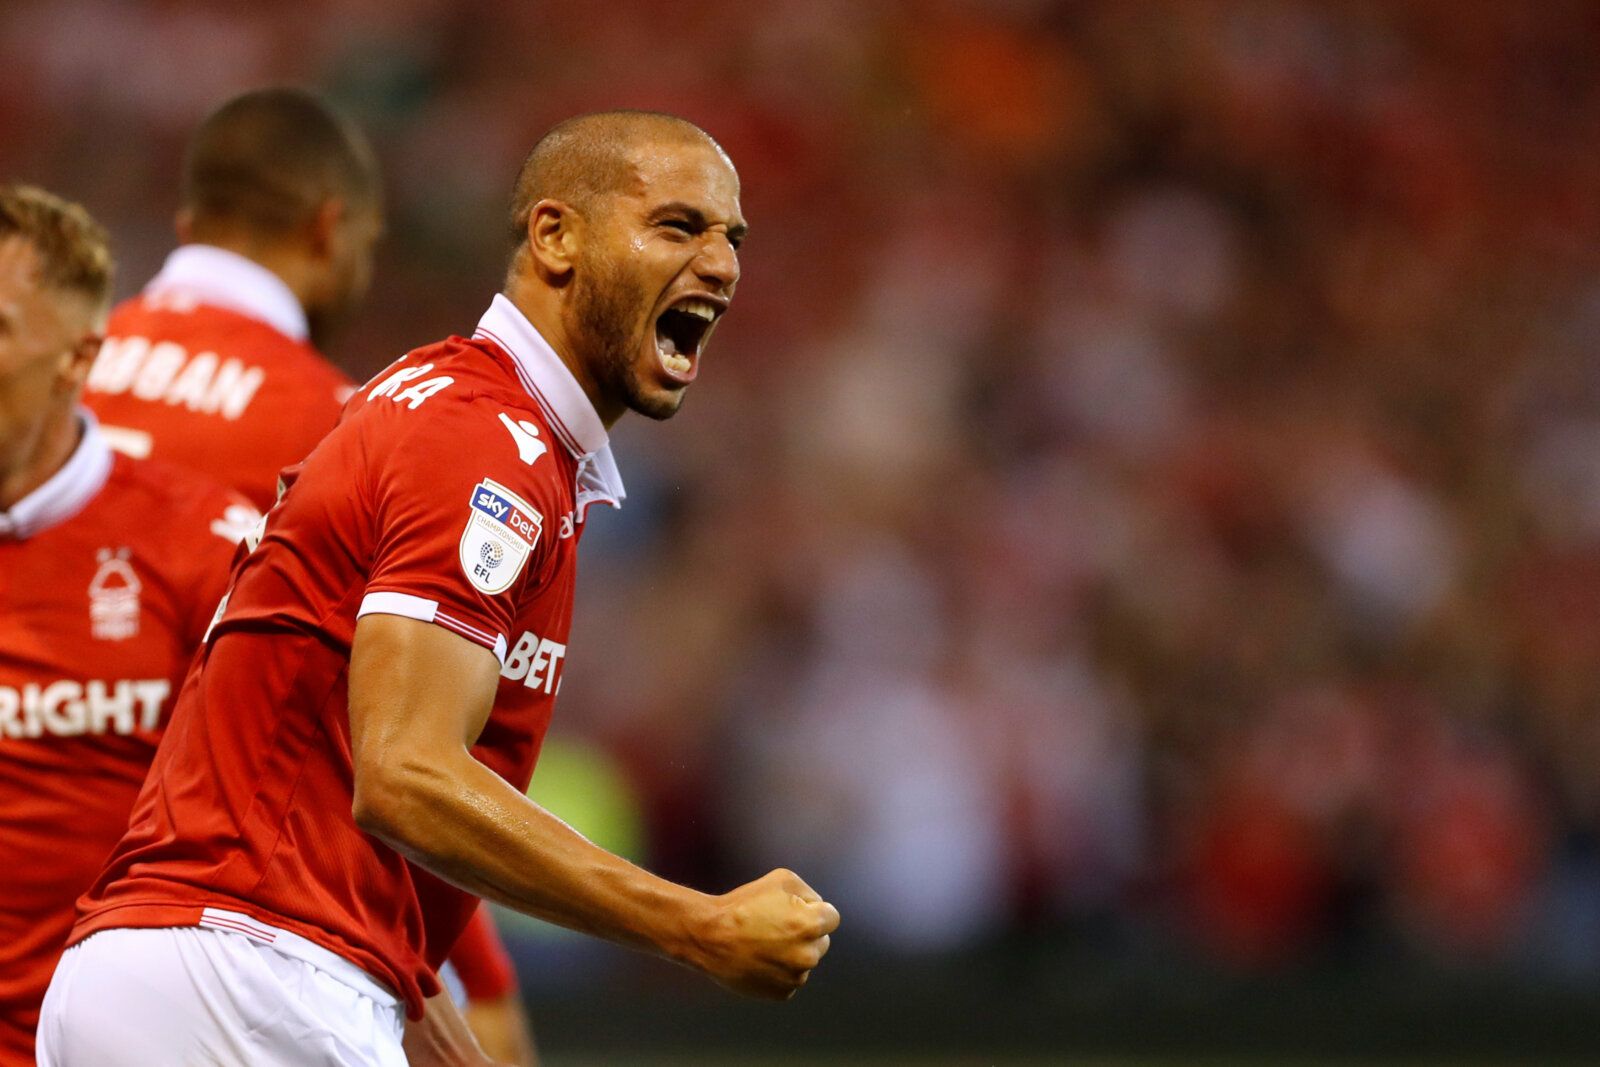 Soccer Football - Championship - Nottingham Forest v West Bromwich Albion - The City Ground, Nottingham, Britain - August 7, 2018   Nottingham Forest’s Adlene Guedioura celebrates scoring their first goal    Action Images/Matthew Childs    EDITORIAL USE ONLY. No use with unauthorized audio, video, data, fixture lists, club/league logos or 